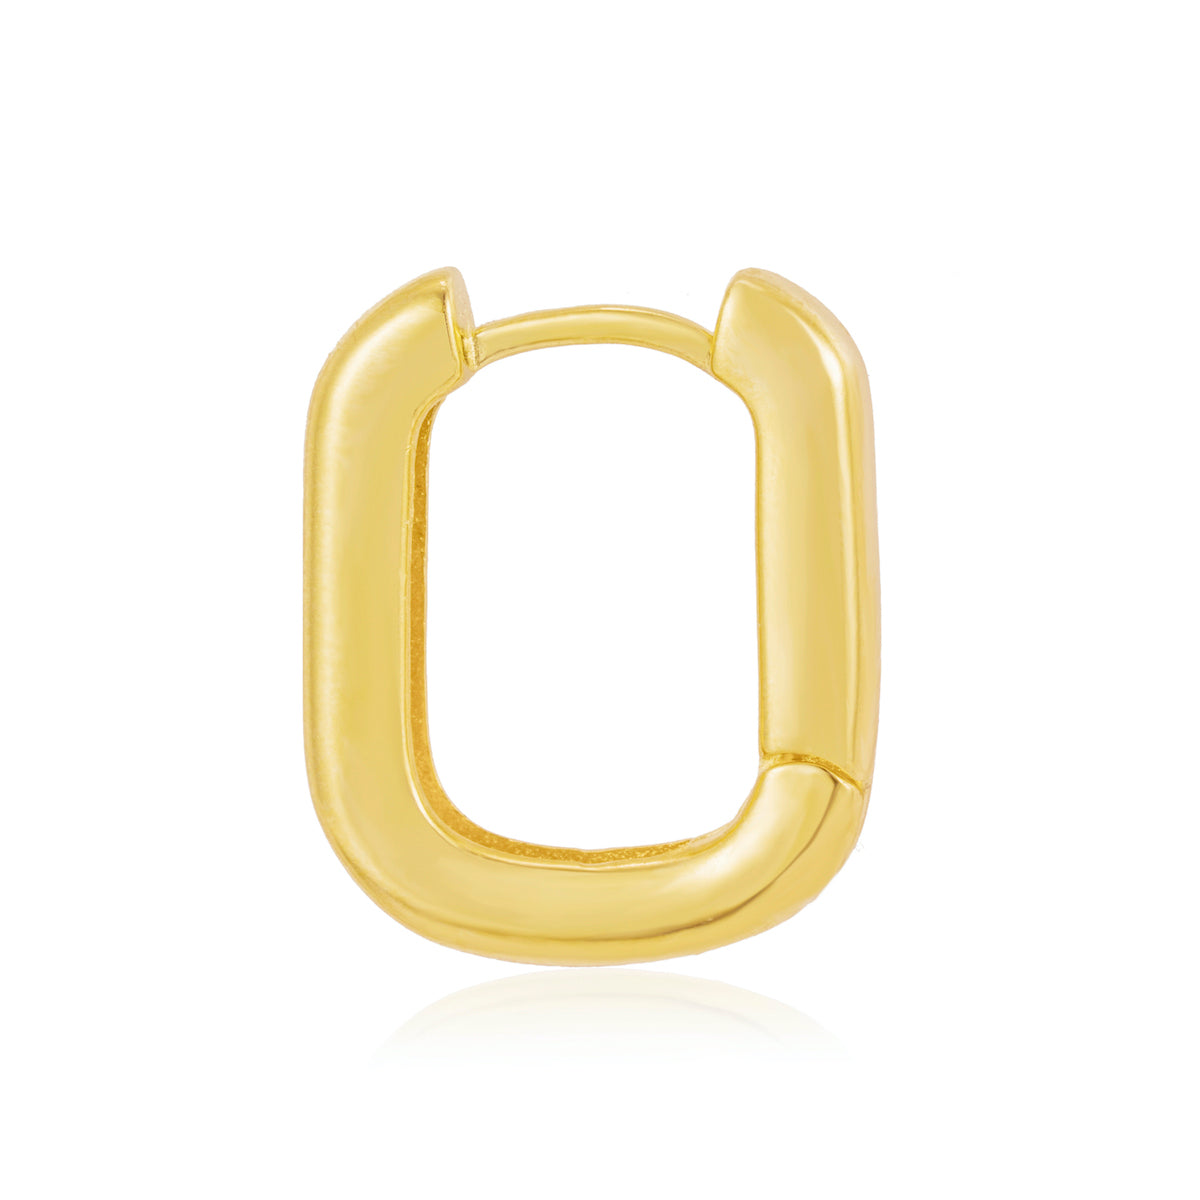 gold plated jewelry earrings square